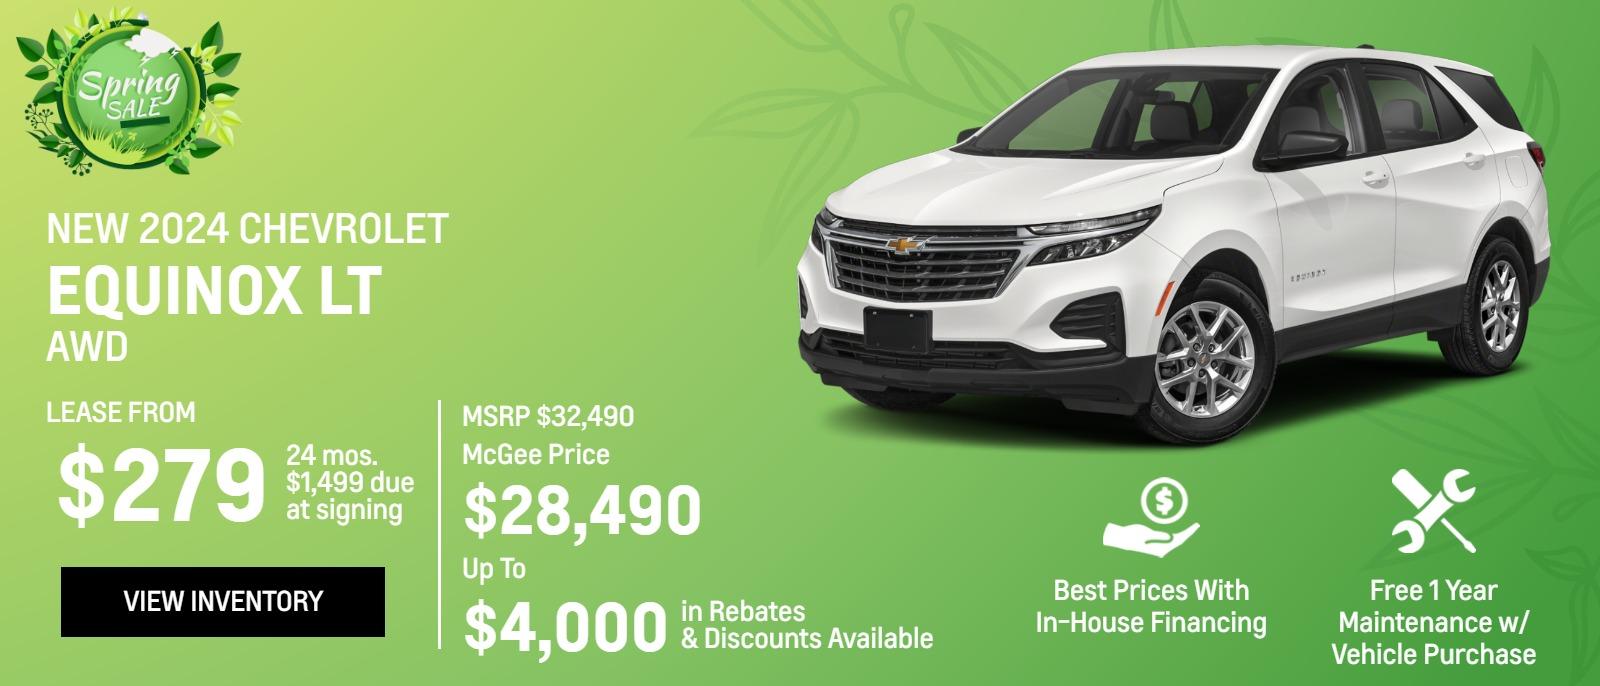 New 2024 Chevrolet
Equinox LT AWD

Lease From
$279
24 mos.
$1,499 due
at signing

MSRP $32,490
McGee Price
$28,490
Up To
$4,000 
in Rebates
&Discounts Available

Best Prices With In-House Financing

Free 1 Year Maintenance
w/ Vehicle Purchase